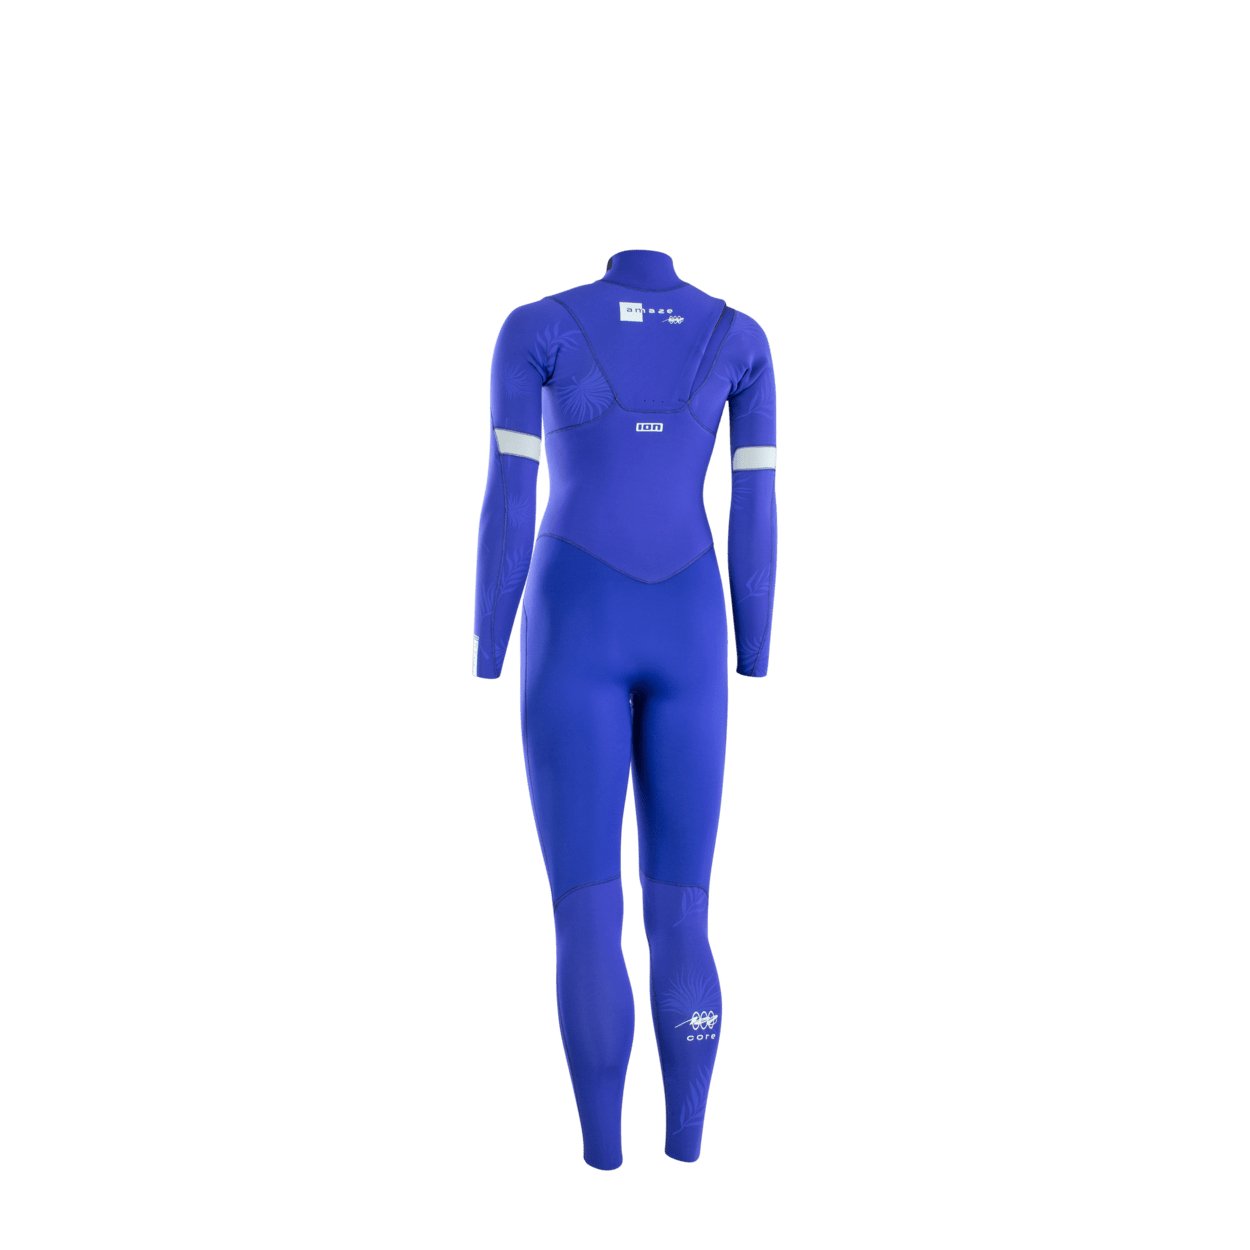 ION Women Wetsuit Amaze Core 5/4 Front Zip 2022 - Worthing Watersports - 9010583057989 - Wetsuits - ION Water